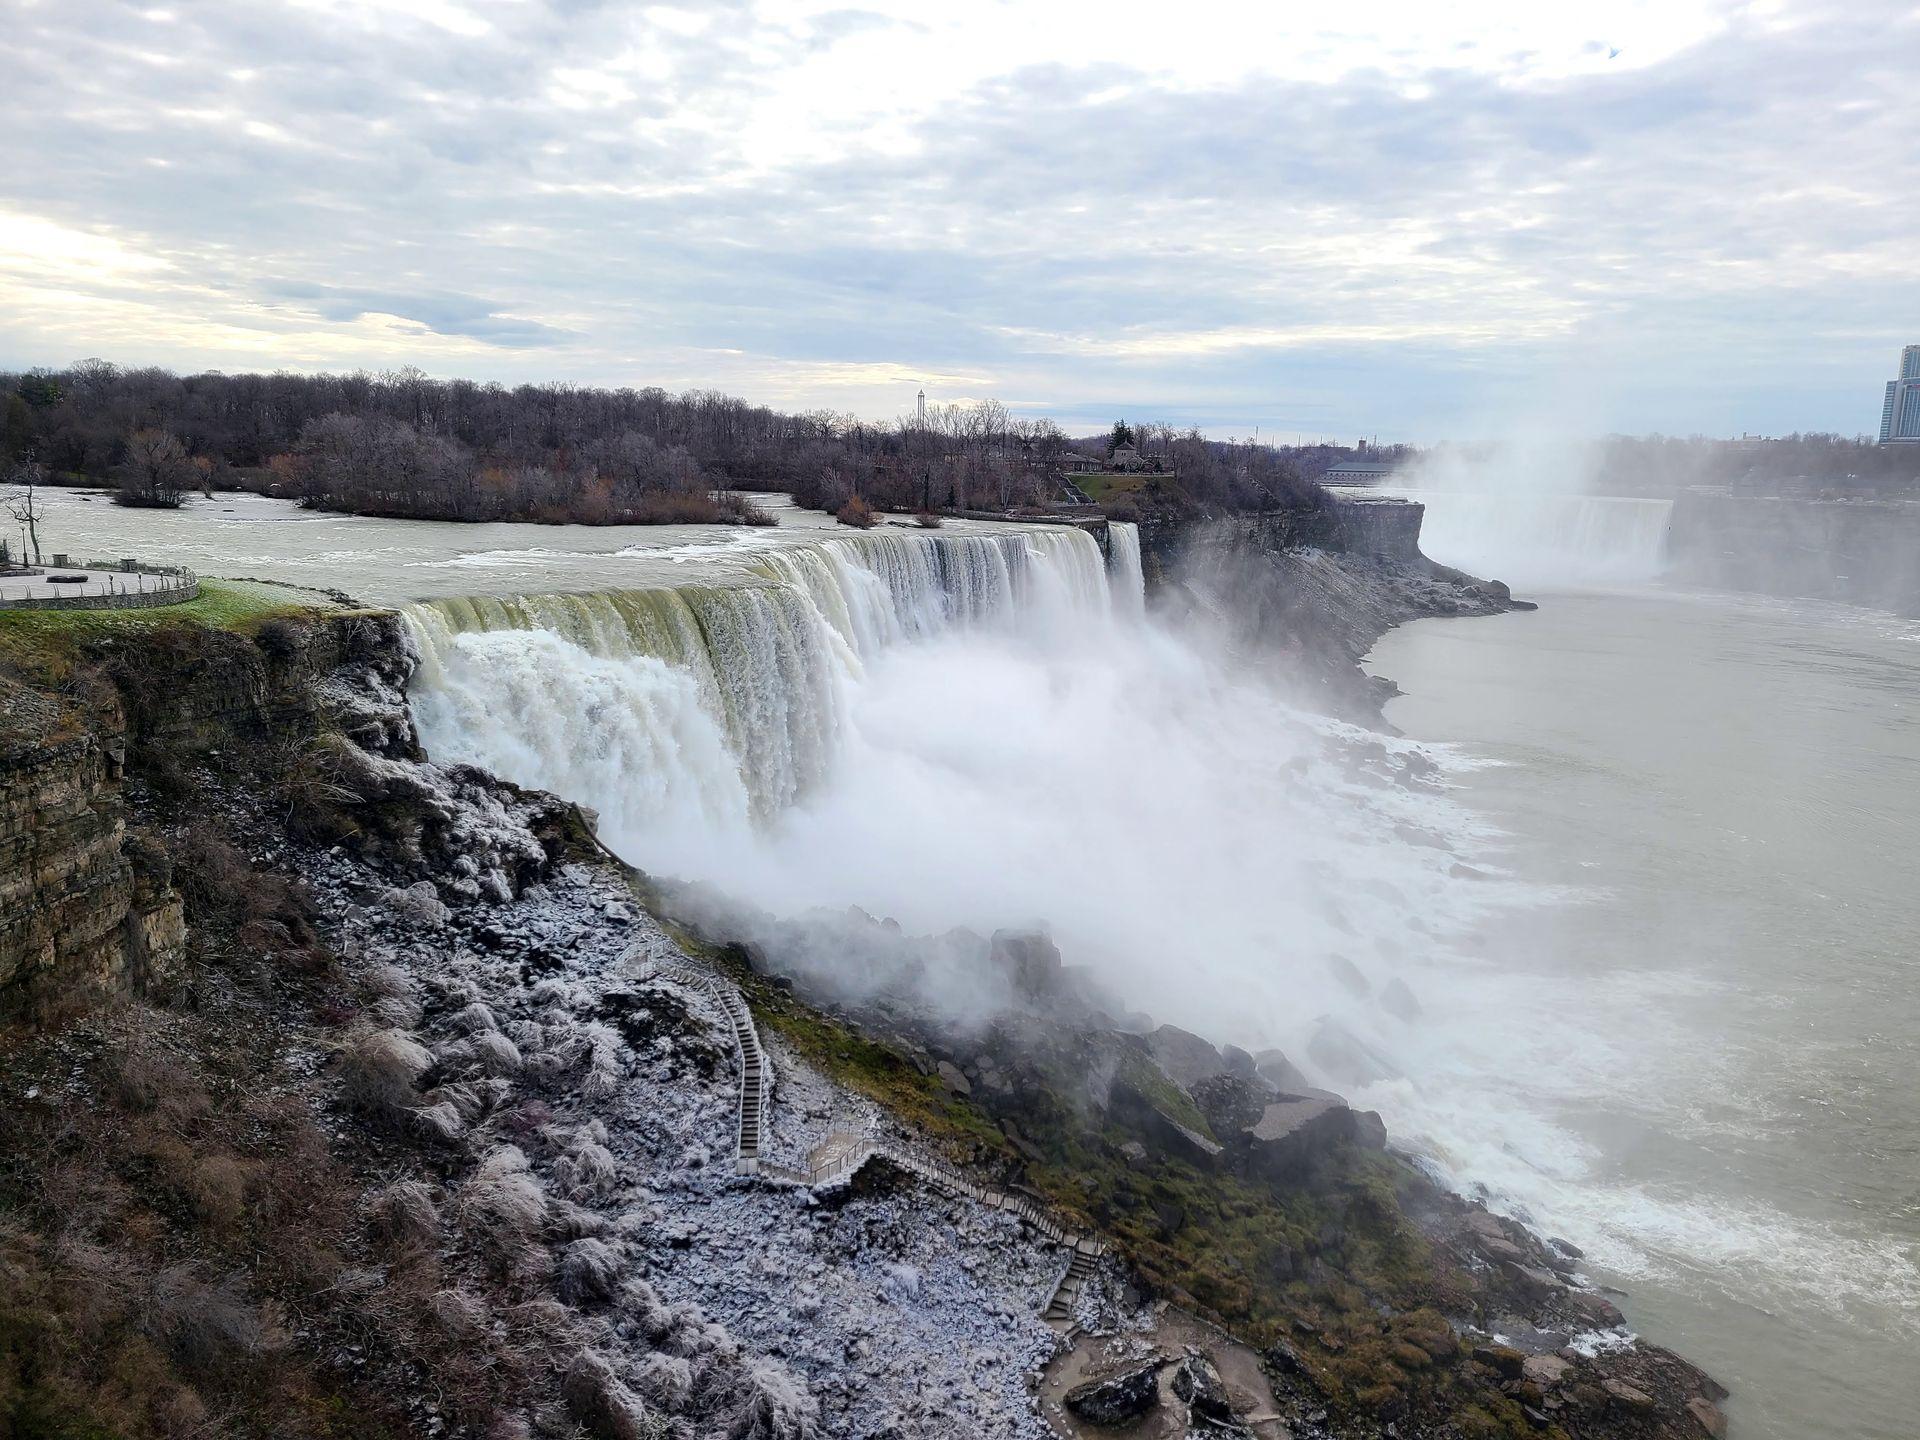 Looking at American Falls, a large waterfall. There is a light dusting of snow next to the water.